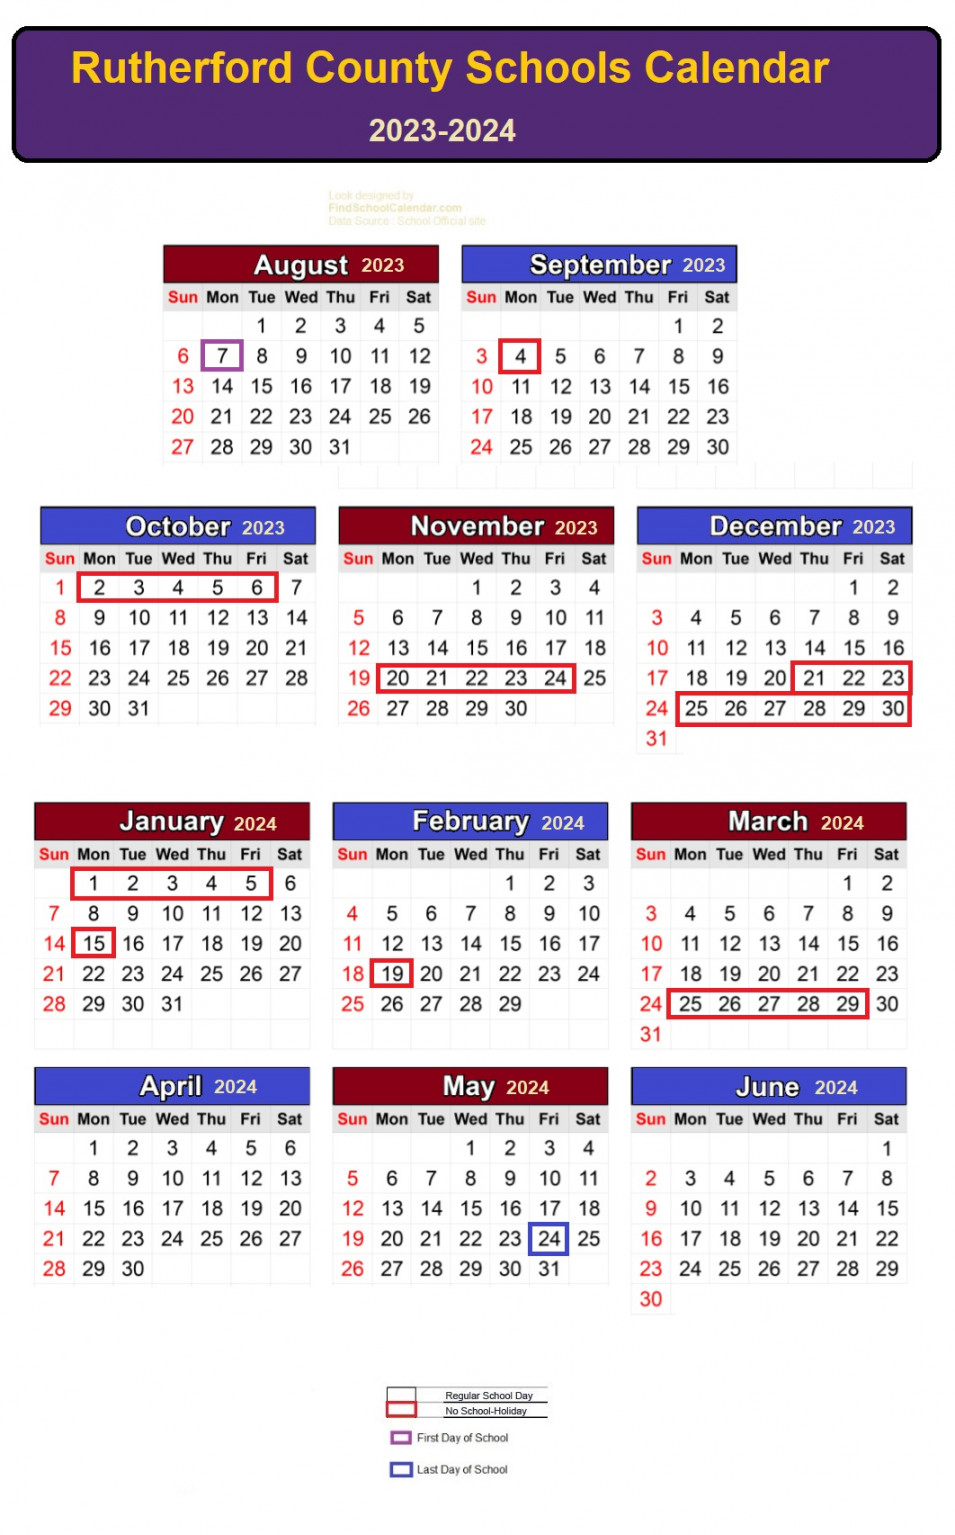 Rutherford County Schools Calendar -  List of Holidays